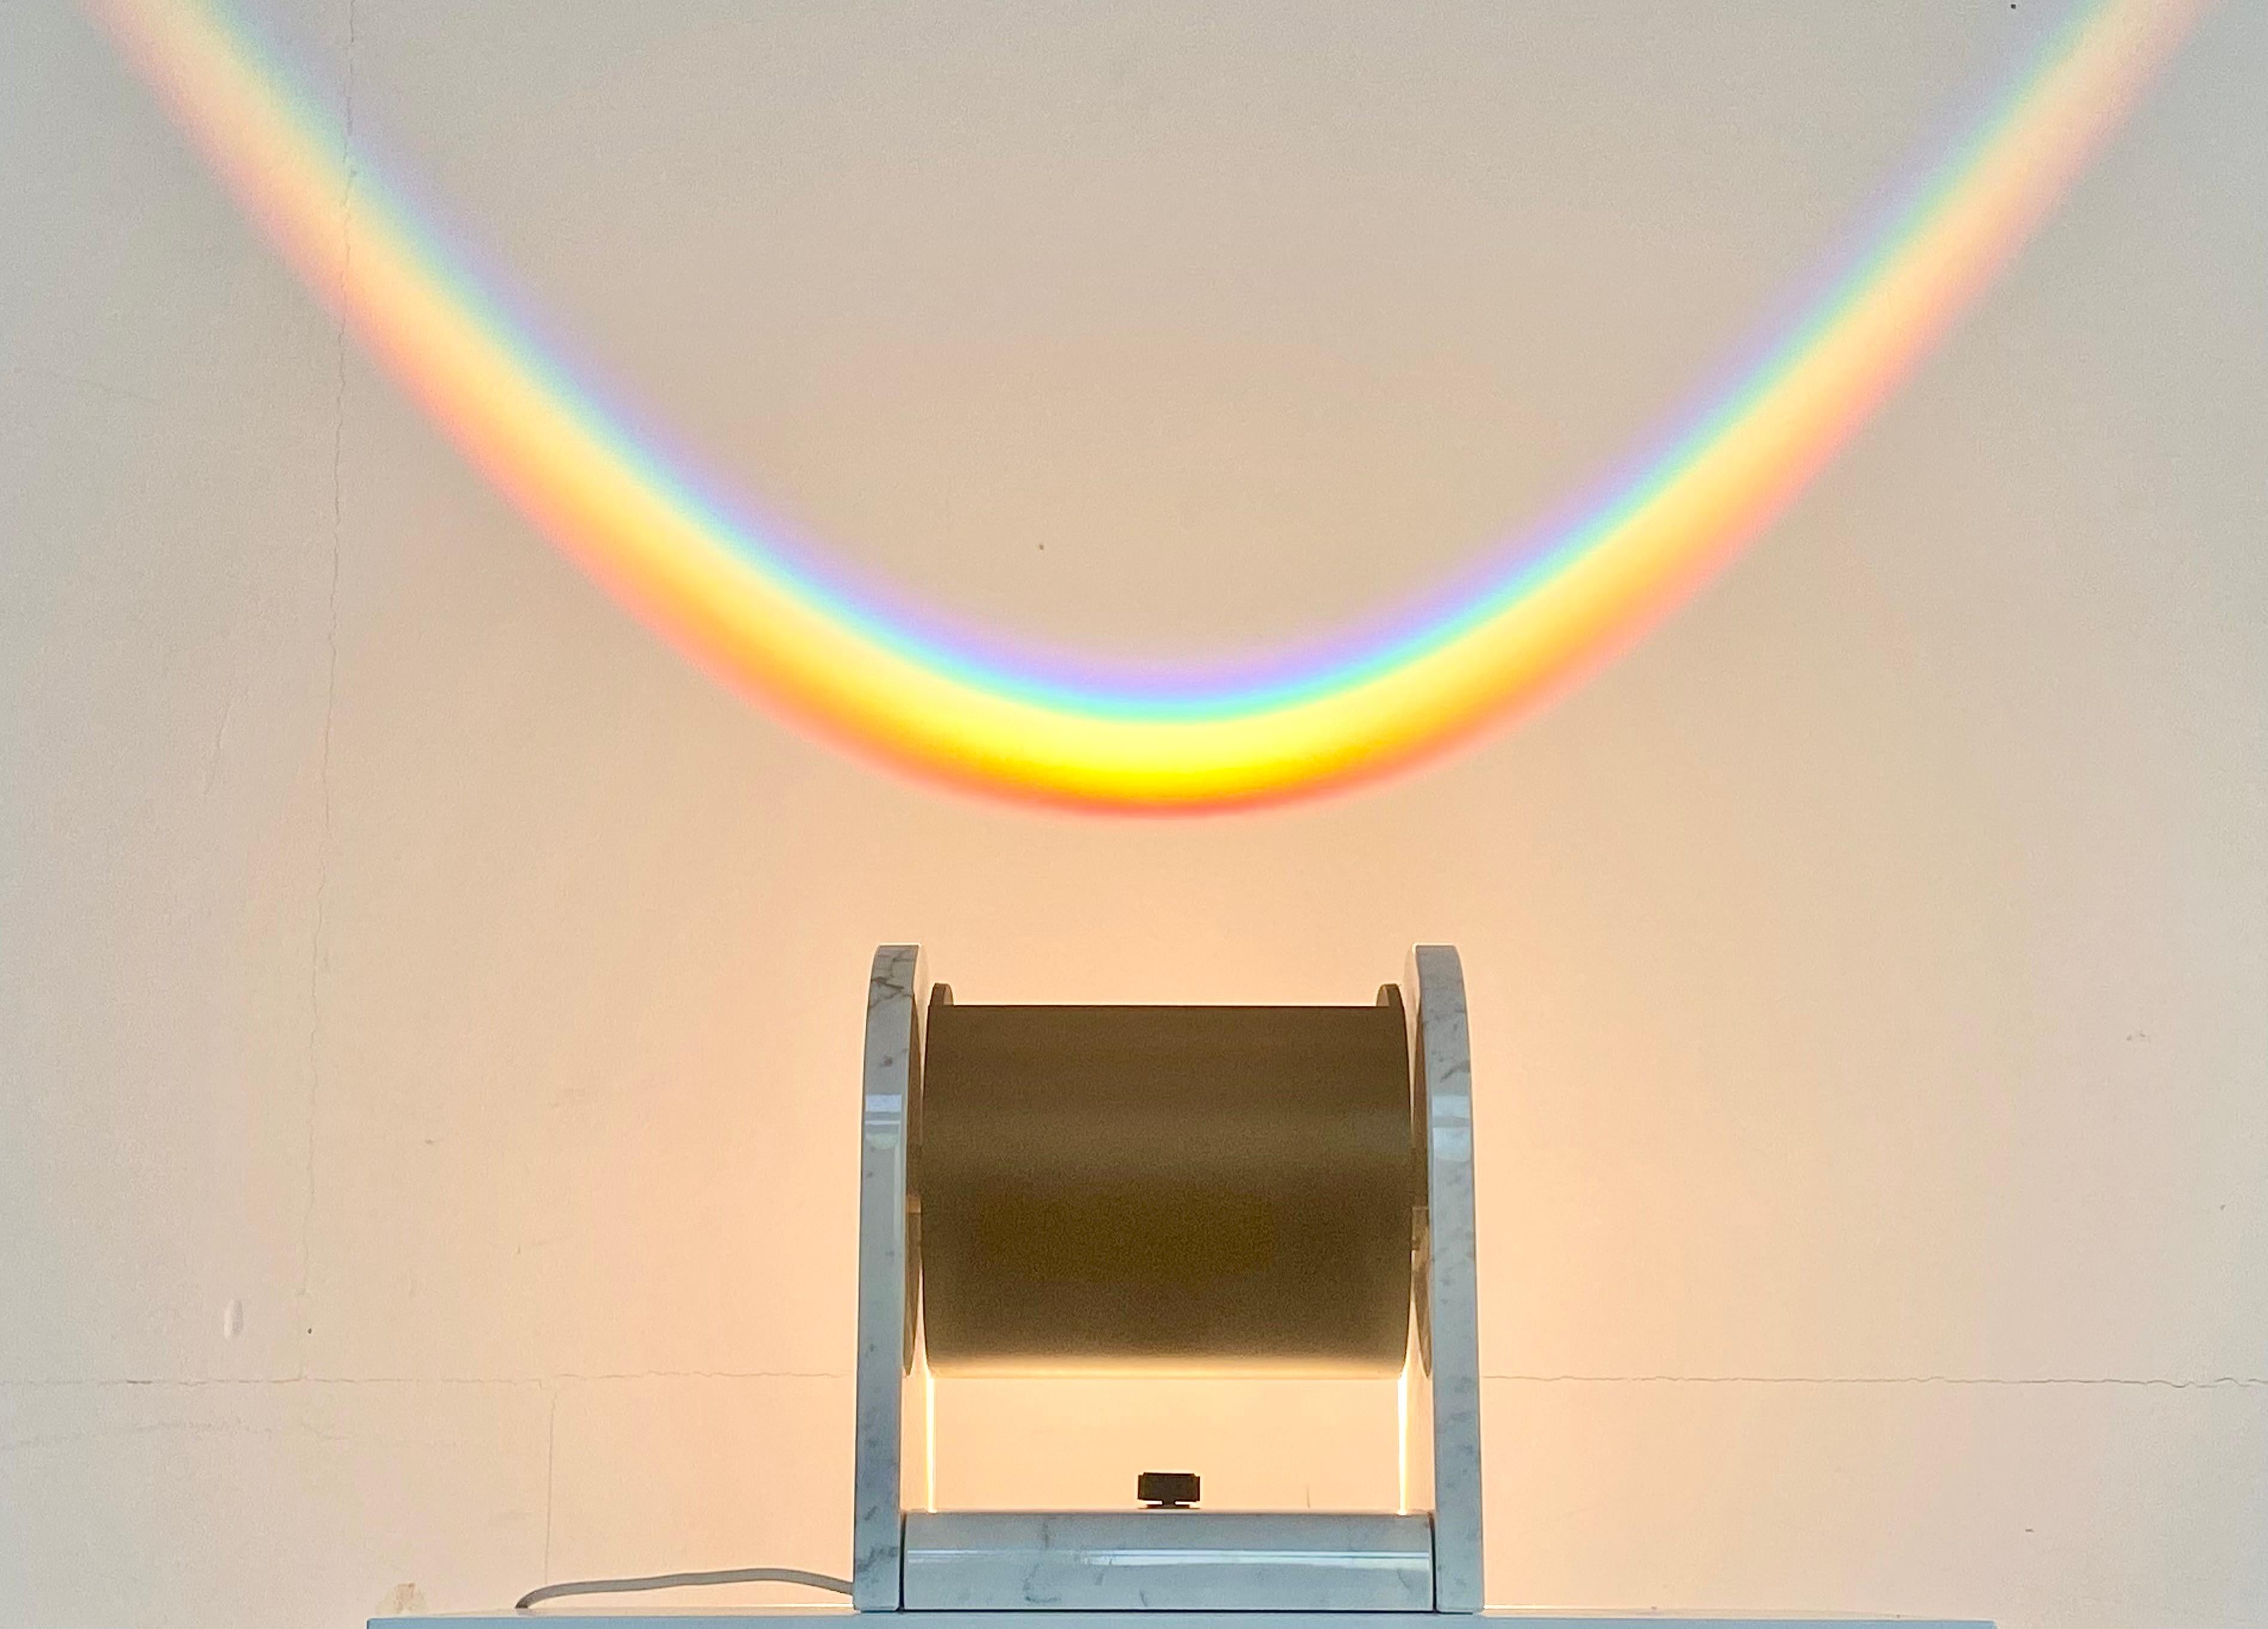 Studio Alchimia Arc-en-Ciel lamp, designed by Andrea Belossi in 1979.

After the sun comes rain: A wonderful example of the postmodern lighting is the Arc-en-Ciel lamp, designed by Andrea Belossi for Studio Alchimia.

By Imitating a natural